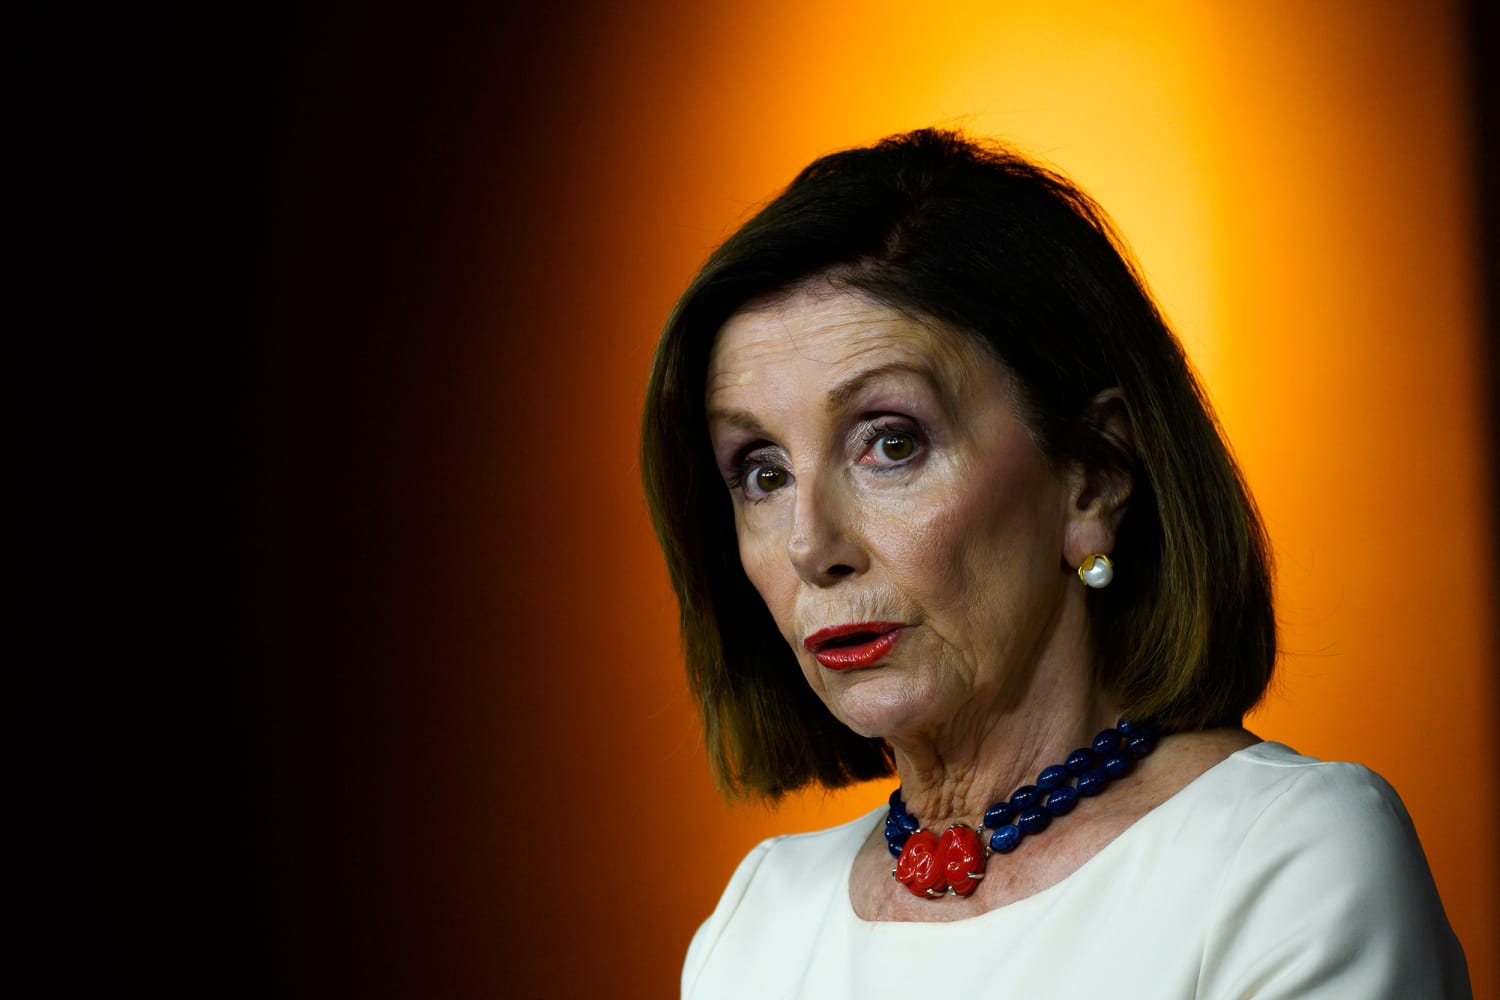 Arizona man convicted after threatening Pelosi with ‘I’m coming to kill you’ message